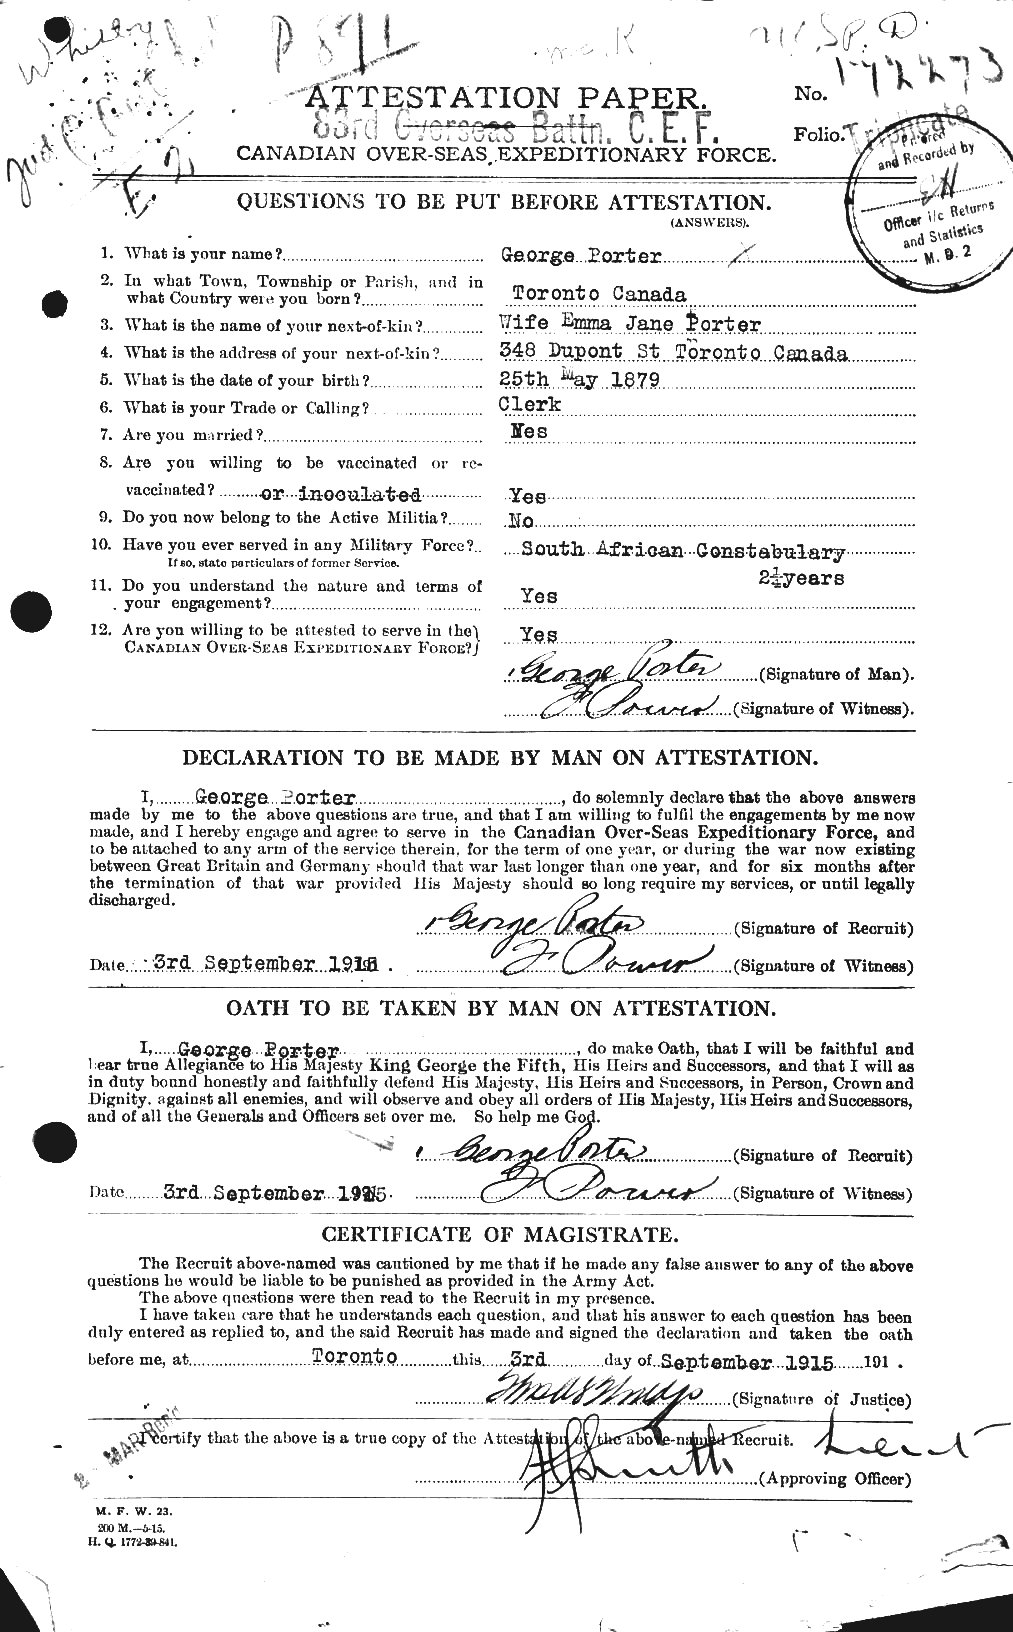 Personnel Records of the First World War - CEF 583592a